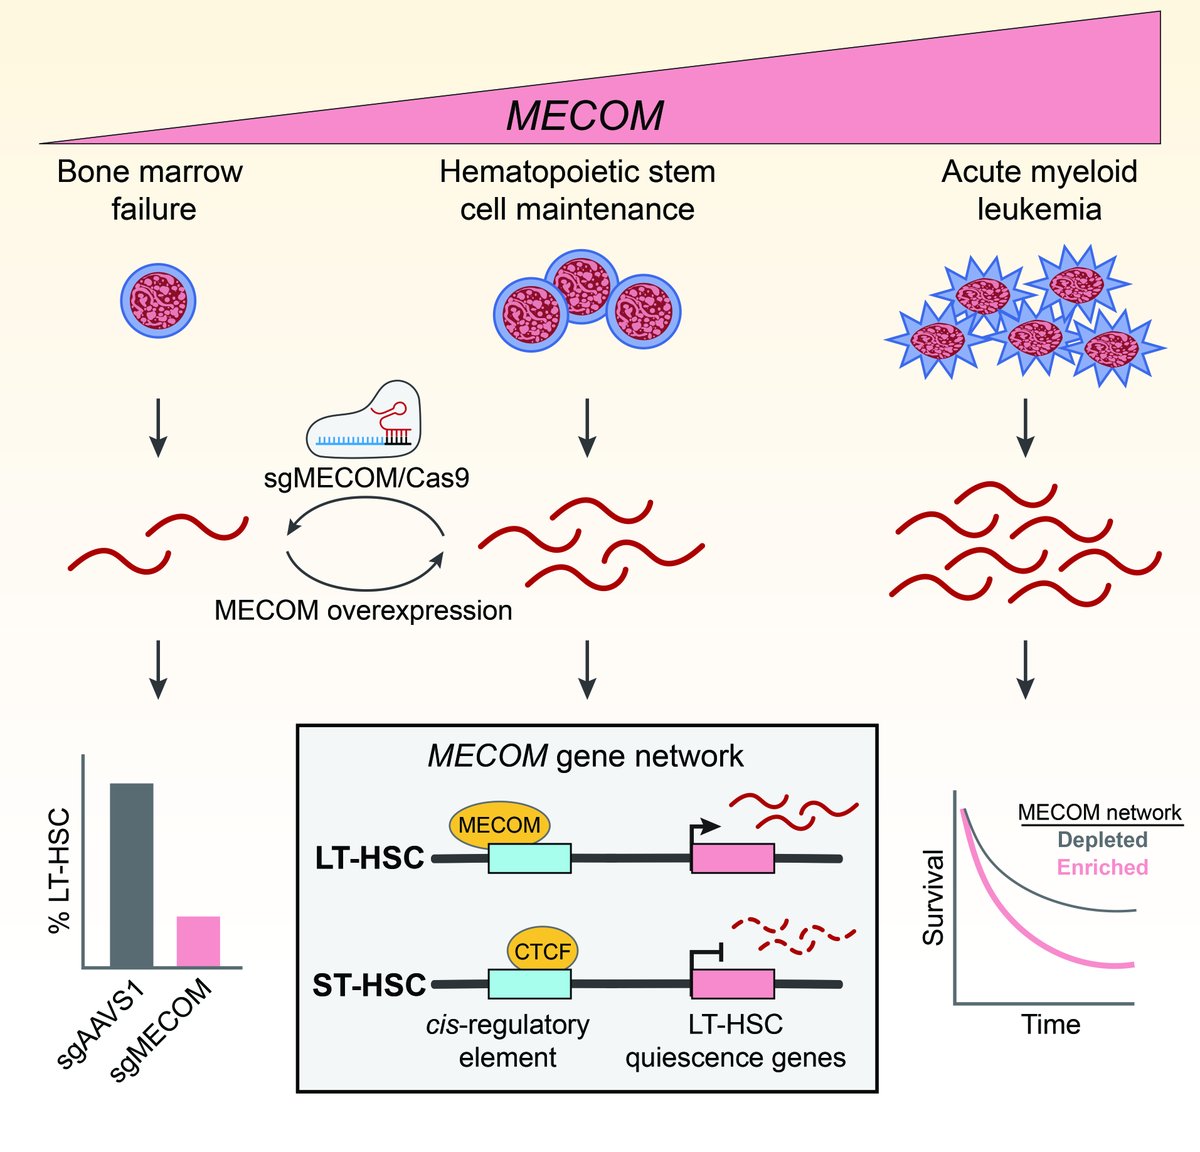 Wonderful to have our paper on a MECOM-regulated gene network in human hematopoietic stem cell maintenance and leukemia published in @NatImmunol! Terrific work from our group led by @RichardVoit, @Taoliming, and @fulong_yu: nature.com/articles/s4159…